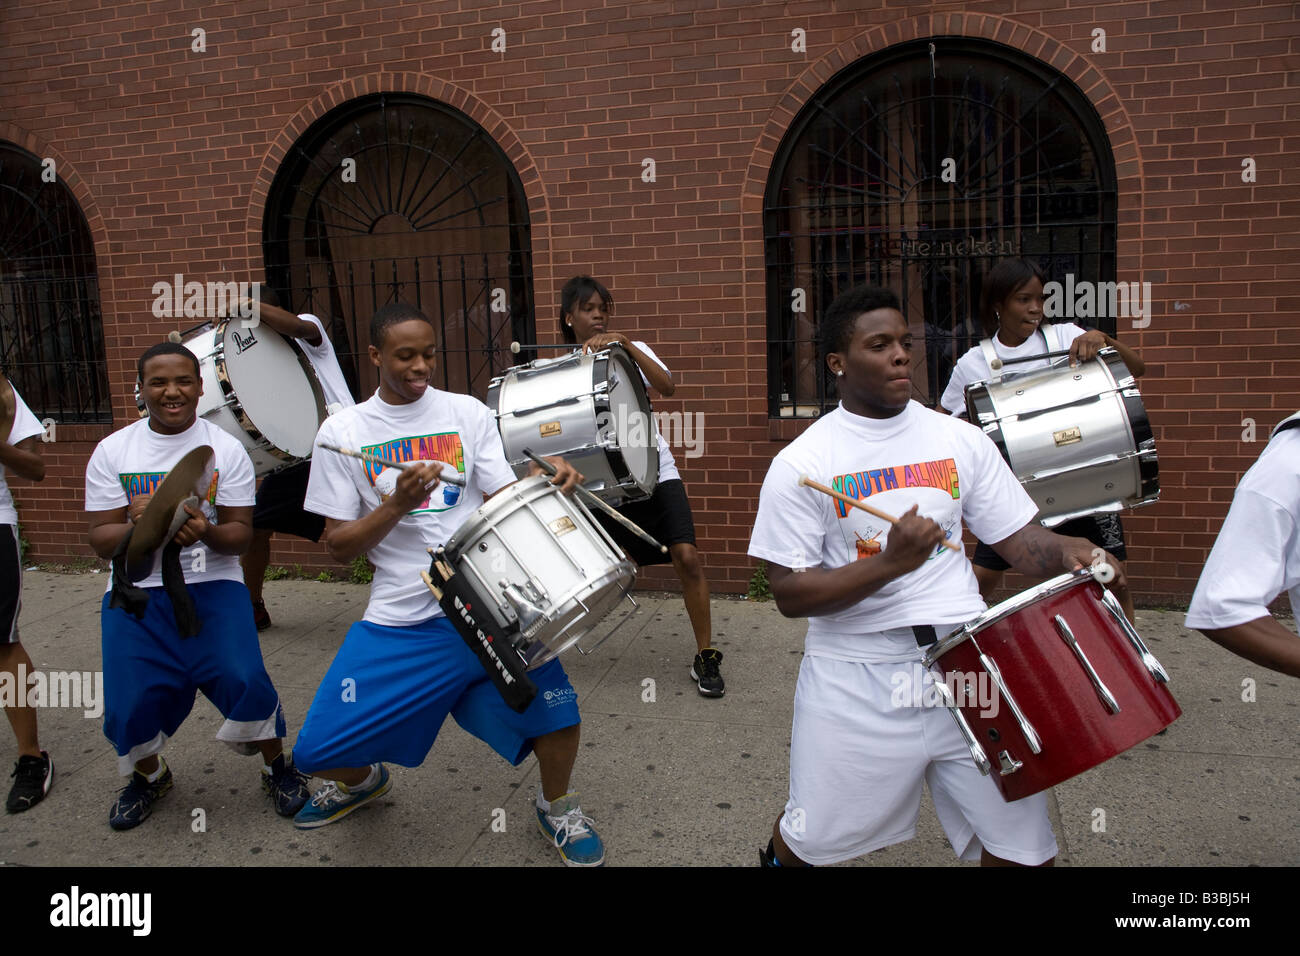 Youth Alive percussion marching band get ready to march at the Brooklyn Queens Day parade in Brooklyn New York Stock Photo